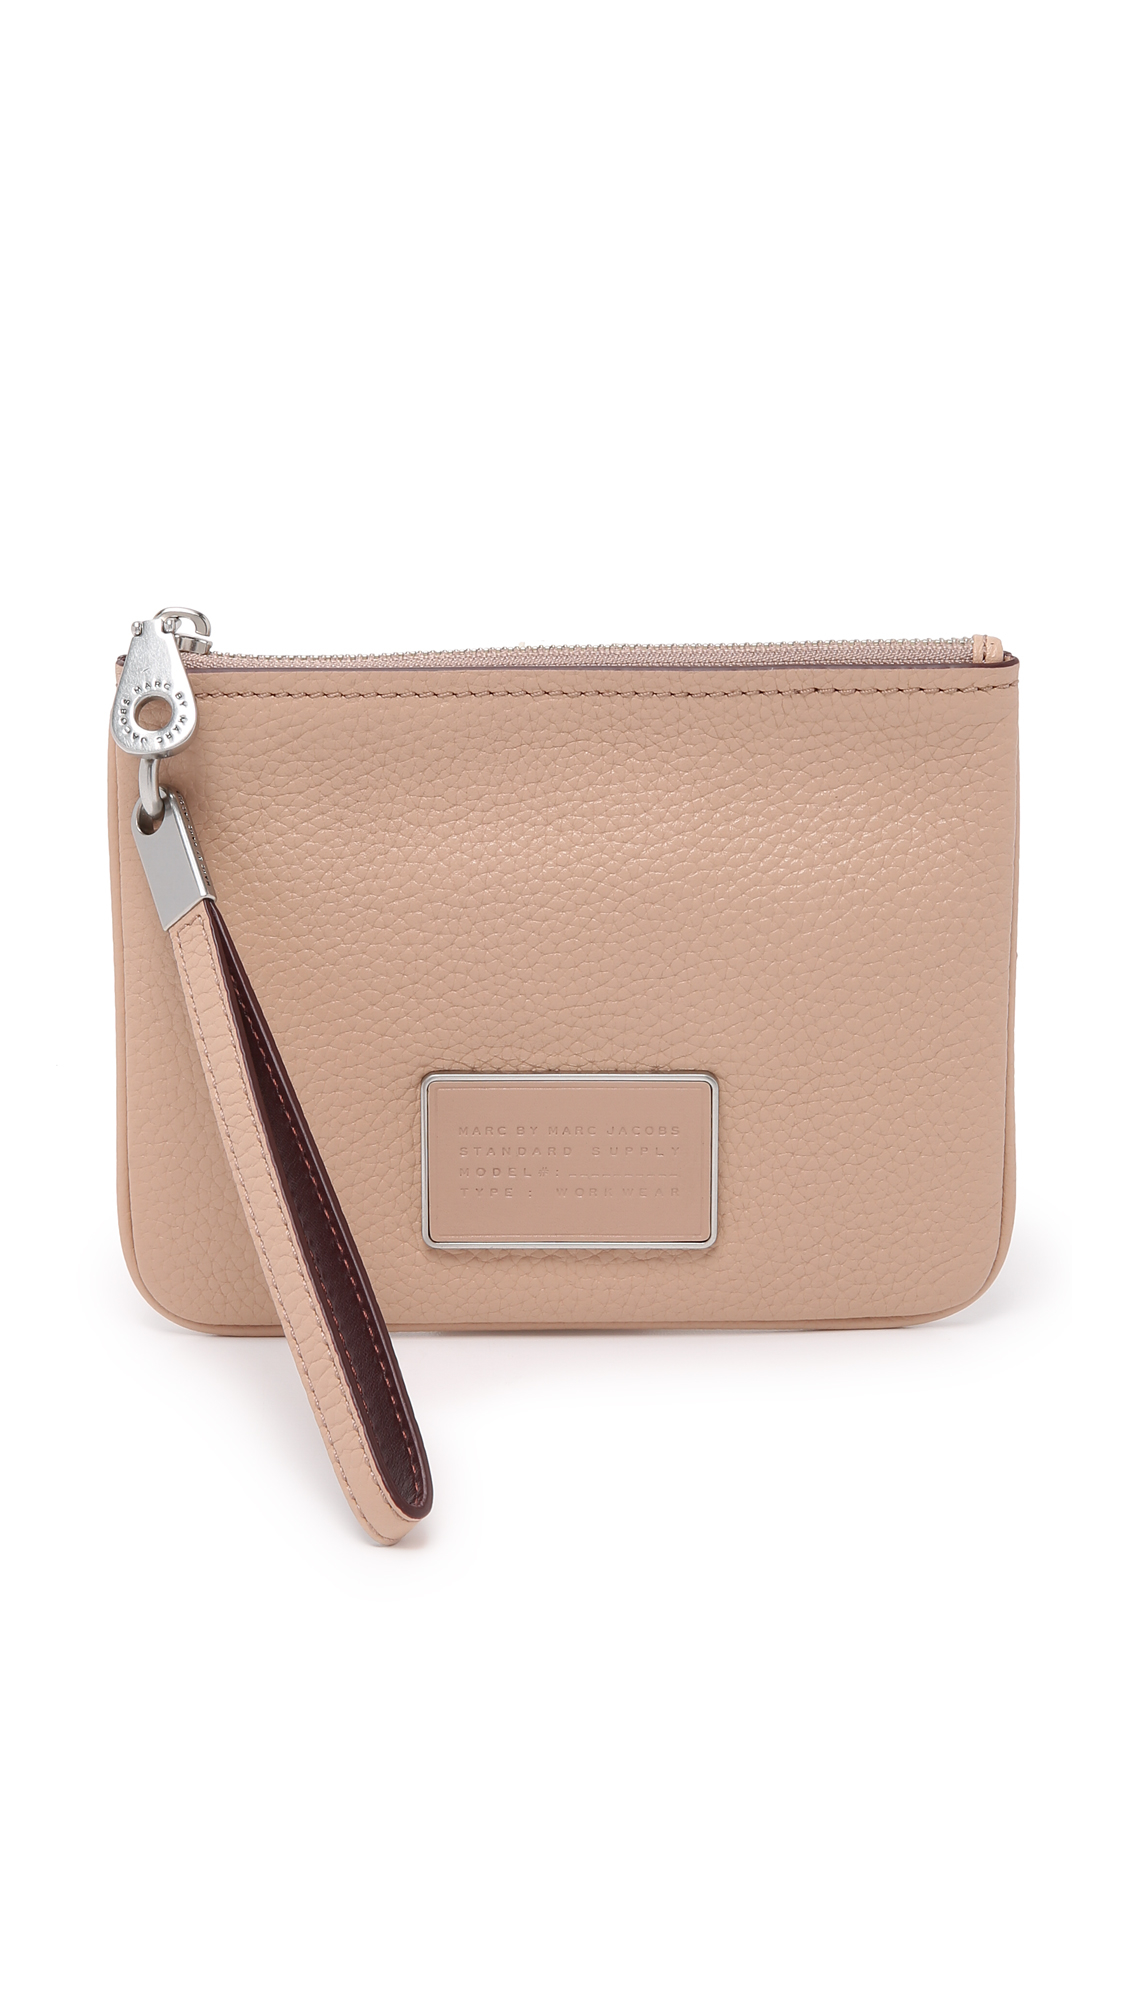 Lyst - Marc By Marc Jacobs Ligero Capacity Wristlet Pouch in Natural